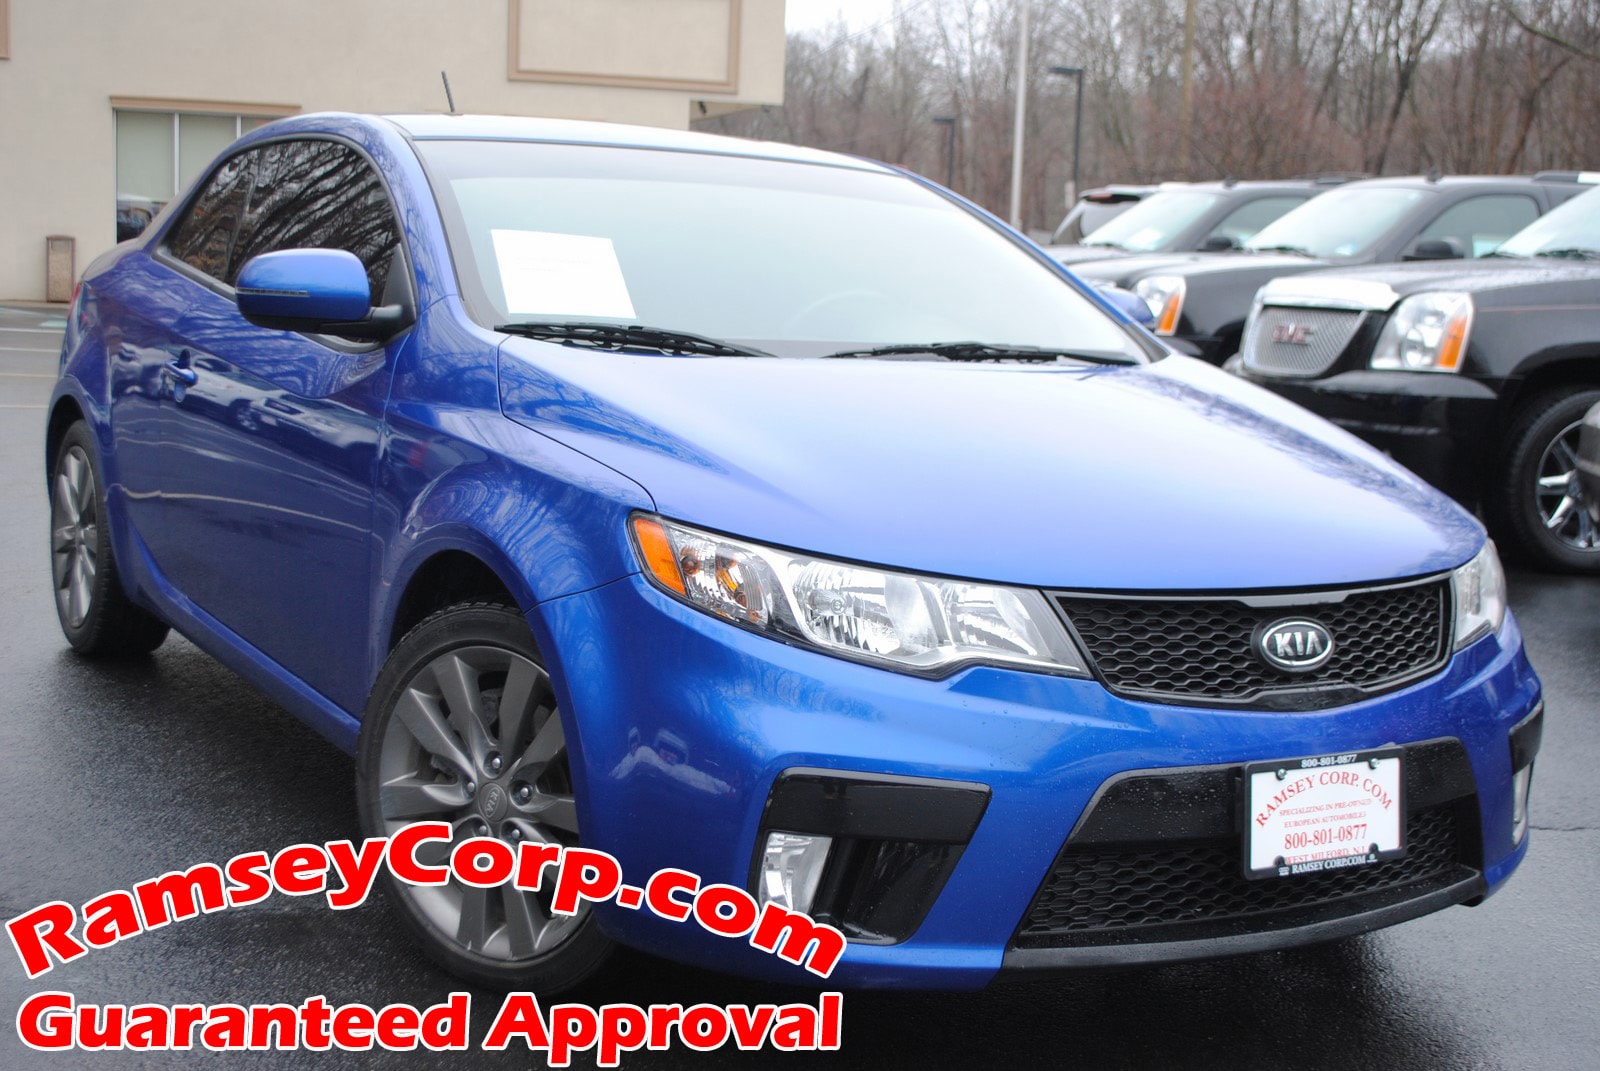 Used 2012 Kia Forte Koup For Sale at Ramsey Corp. | VIN: KNAFW6A37C5637461